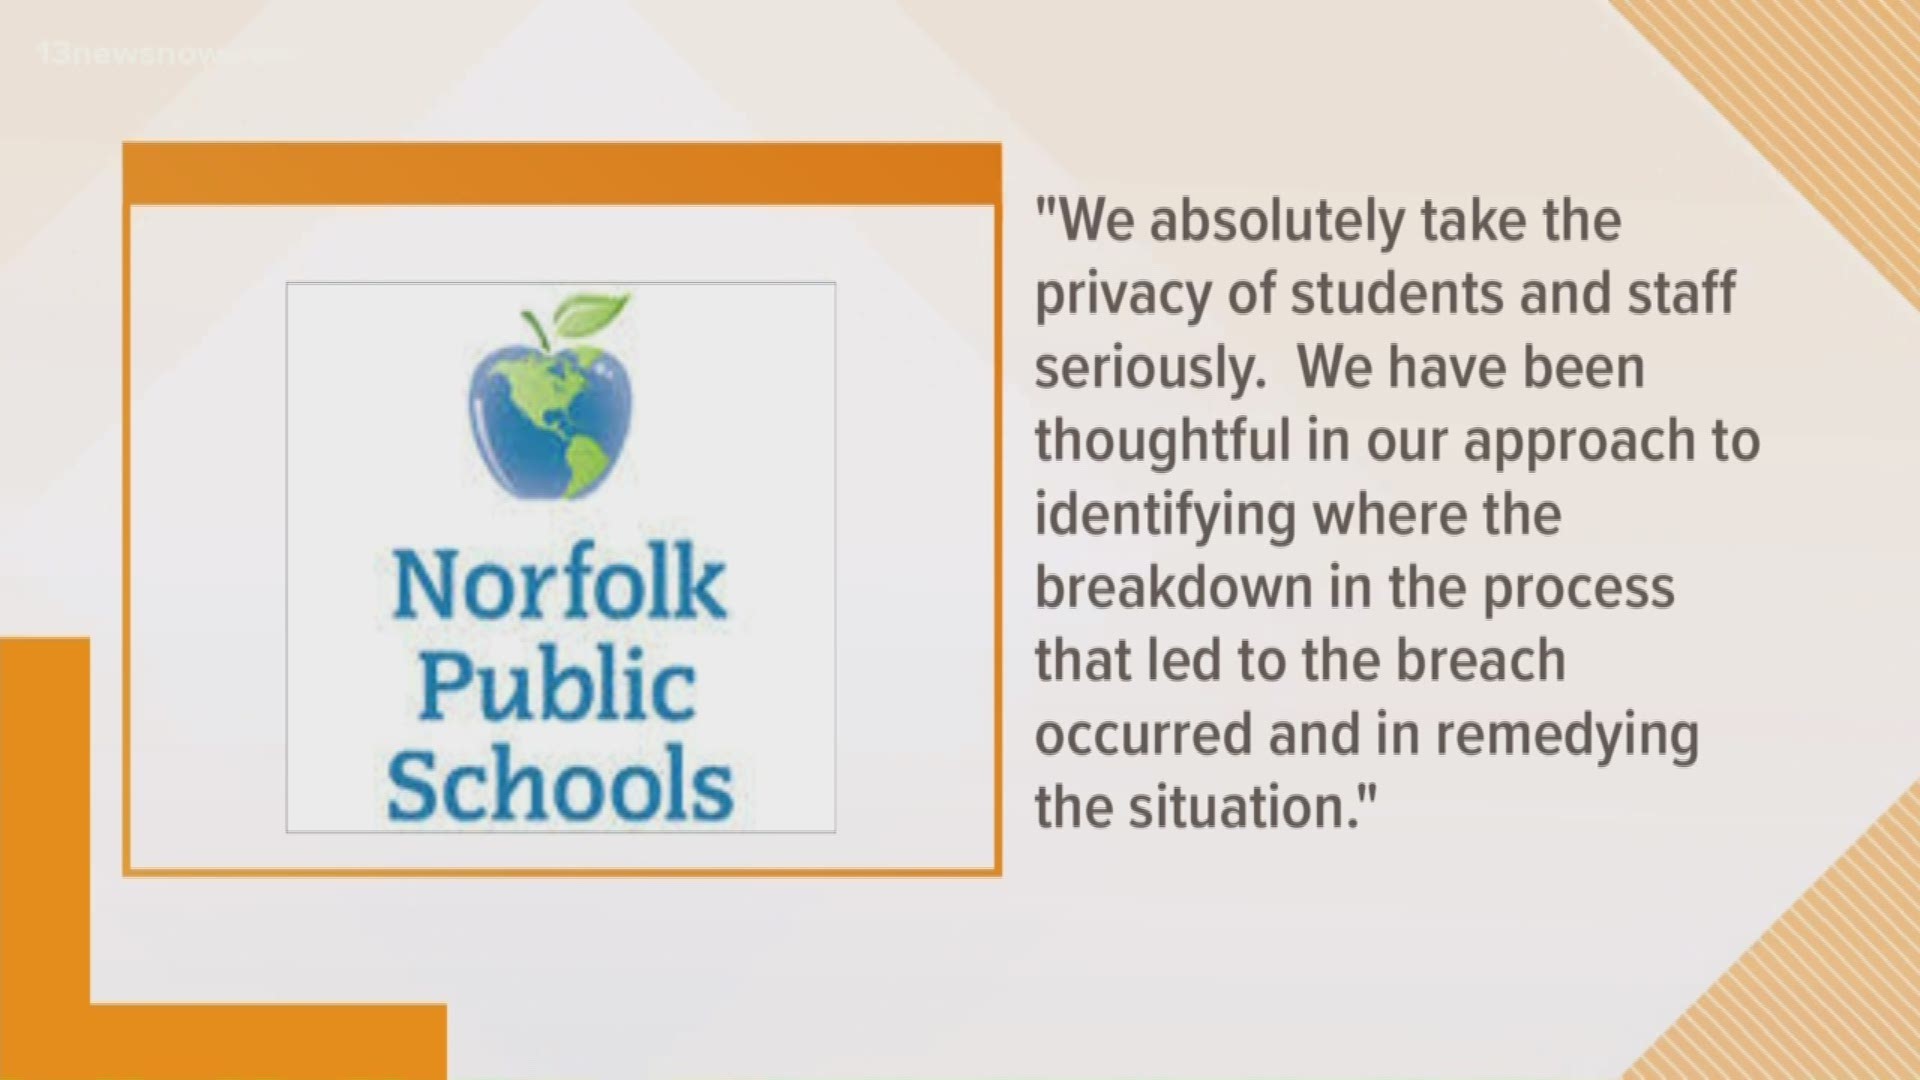 The medical needs of staff and students during an evacuation or crisis were accidentally placed on a public domain platform, rather than a private one, a Norfolk Public Schools official said.